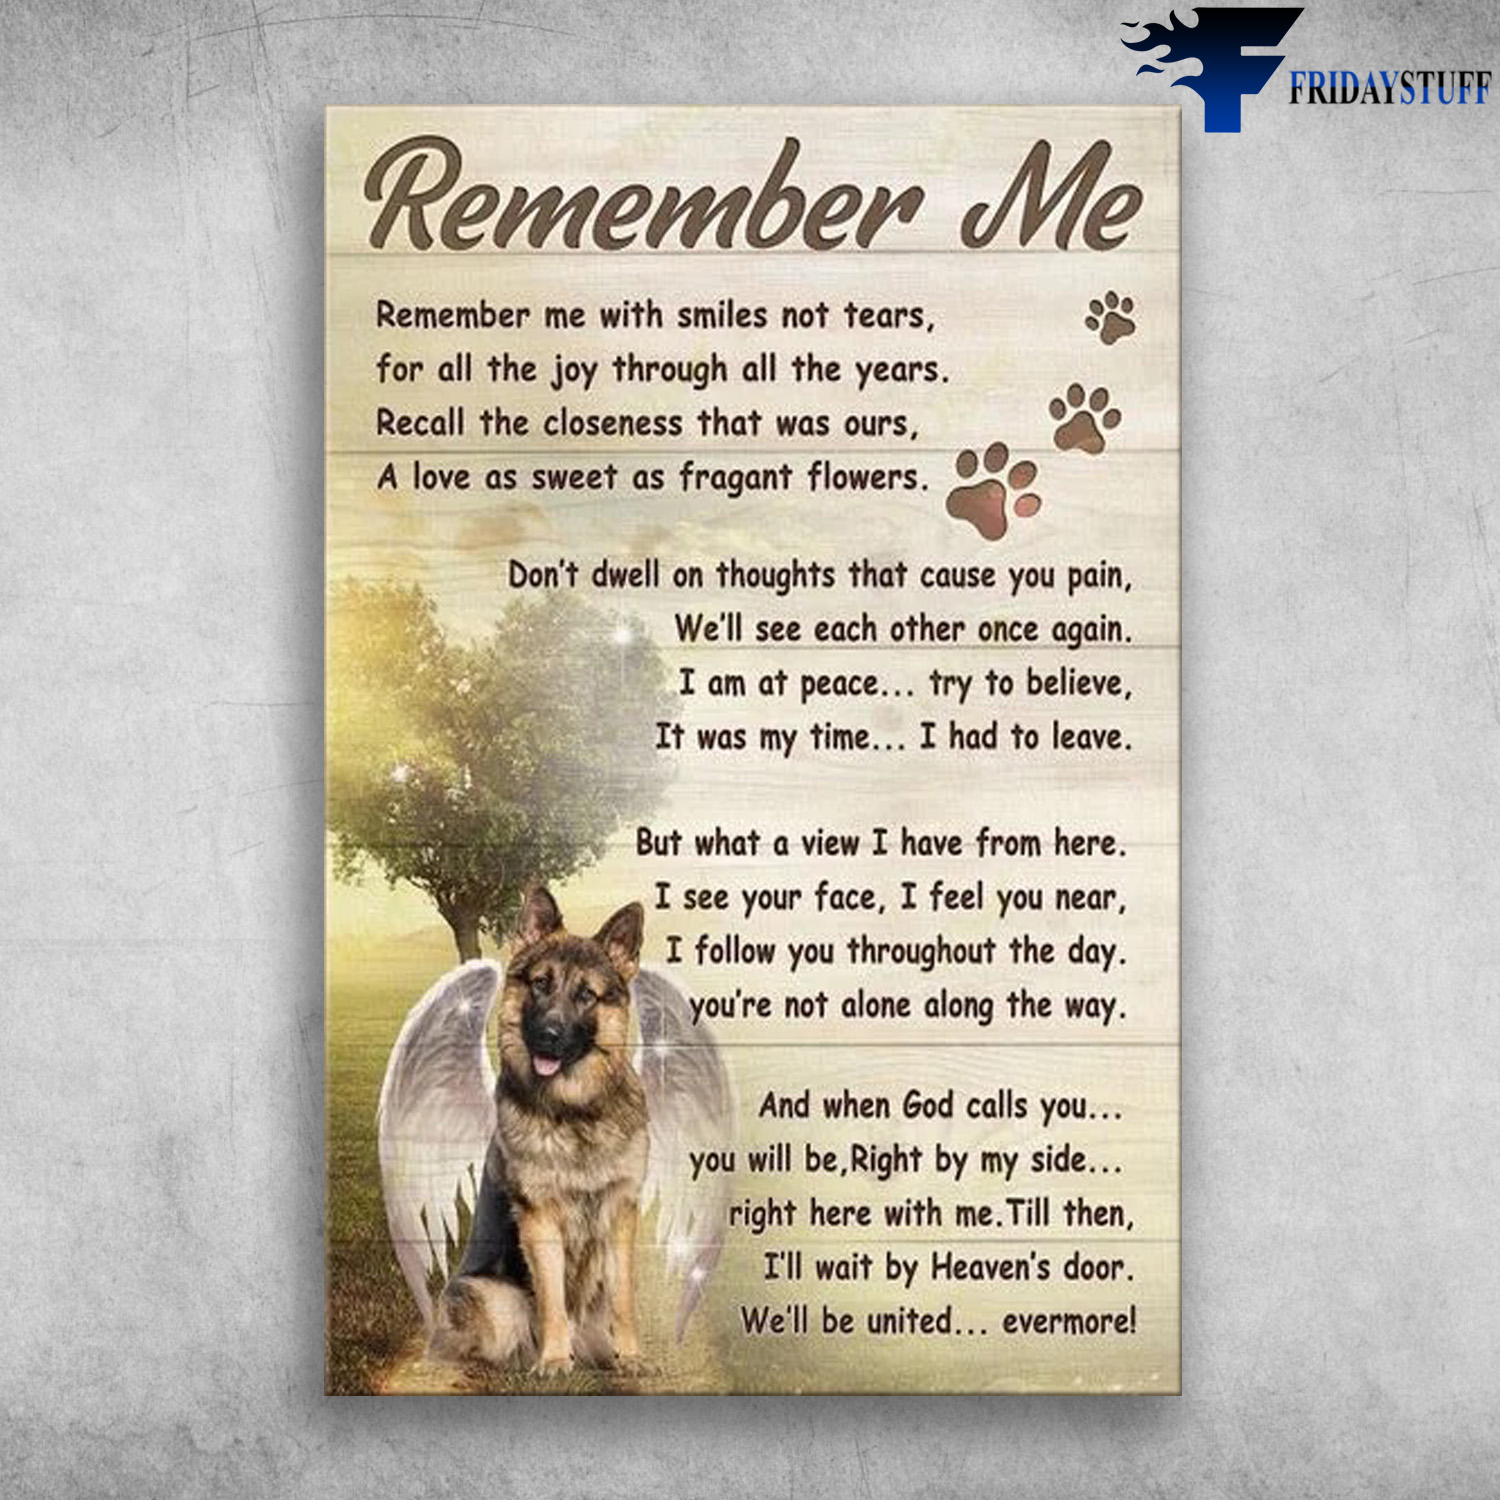 German Shepherd - Remember Me, Remember Me With Smiles Not Tears, For All The Joy Through All The Years, Recall The Closeness That Was Our, A Love As Sweet As Fragant Flowers, Don't Dwell On Thoughts That Cause You Pain